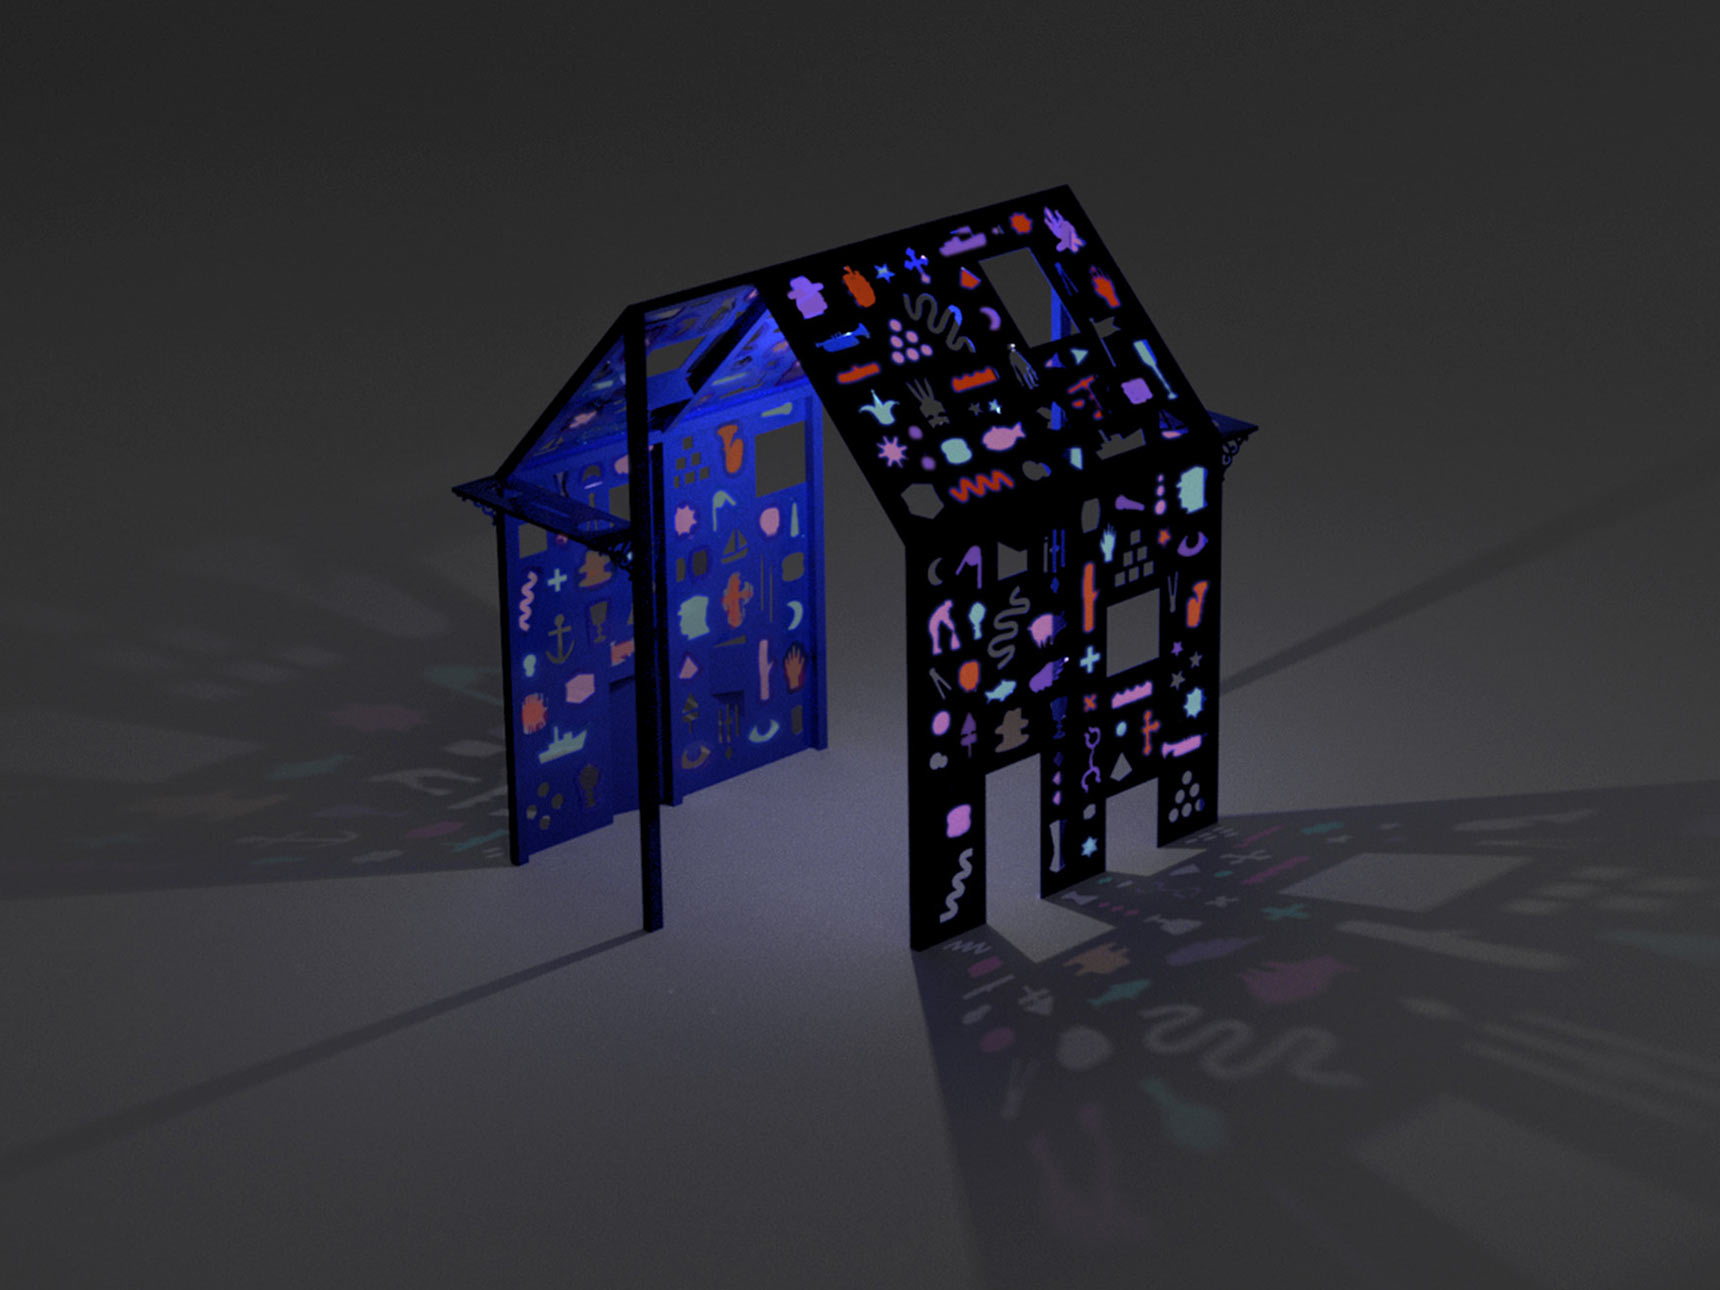 Hieroglyphic House, night rendering of a proposed public art installation of a deep blue house-like structure with walls and roofs punctured by windows of shaped iconographic imagery in vibrant colors. Sunlight streaming through these openings casts colorful shadows on the ground.